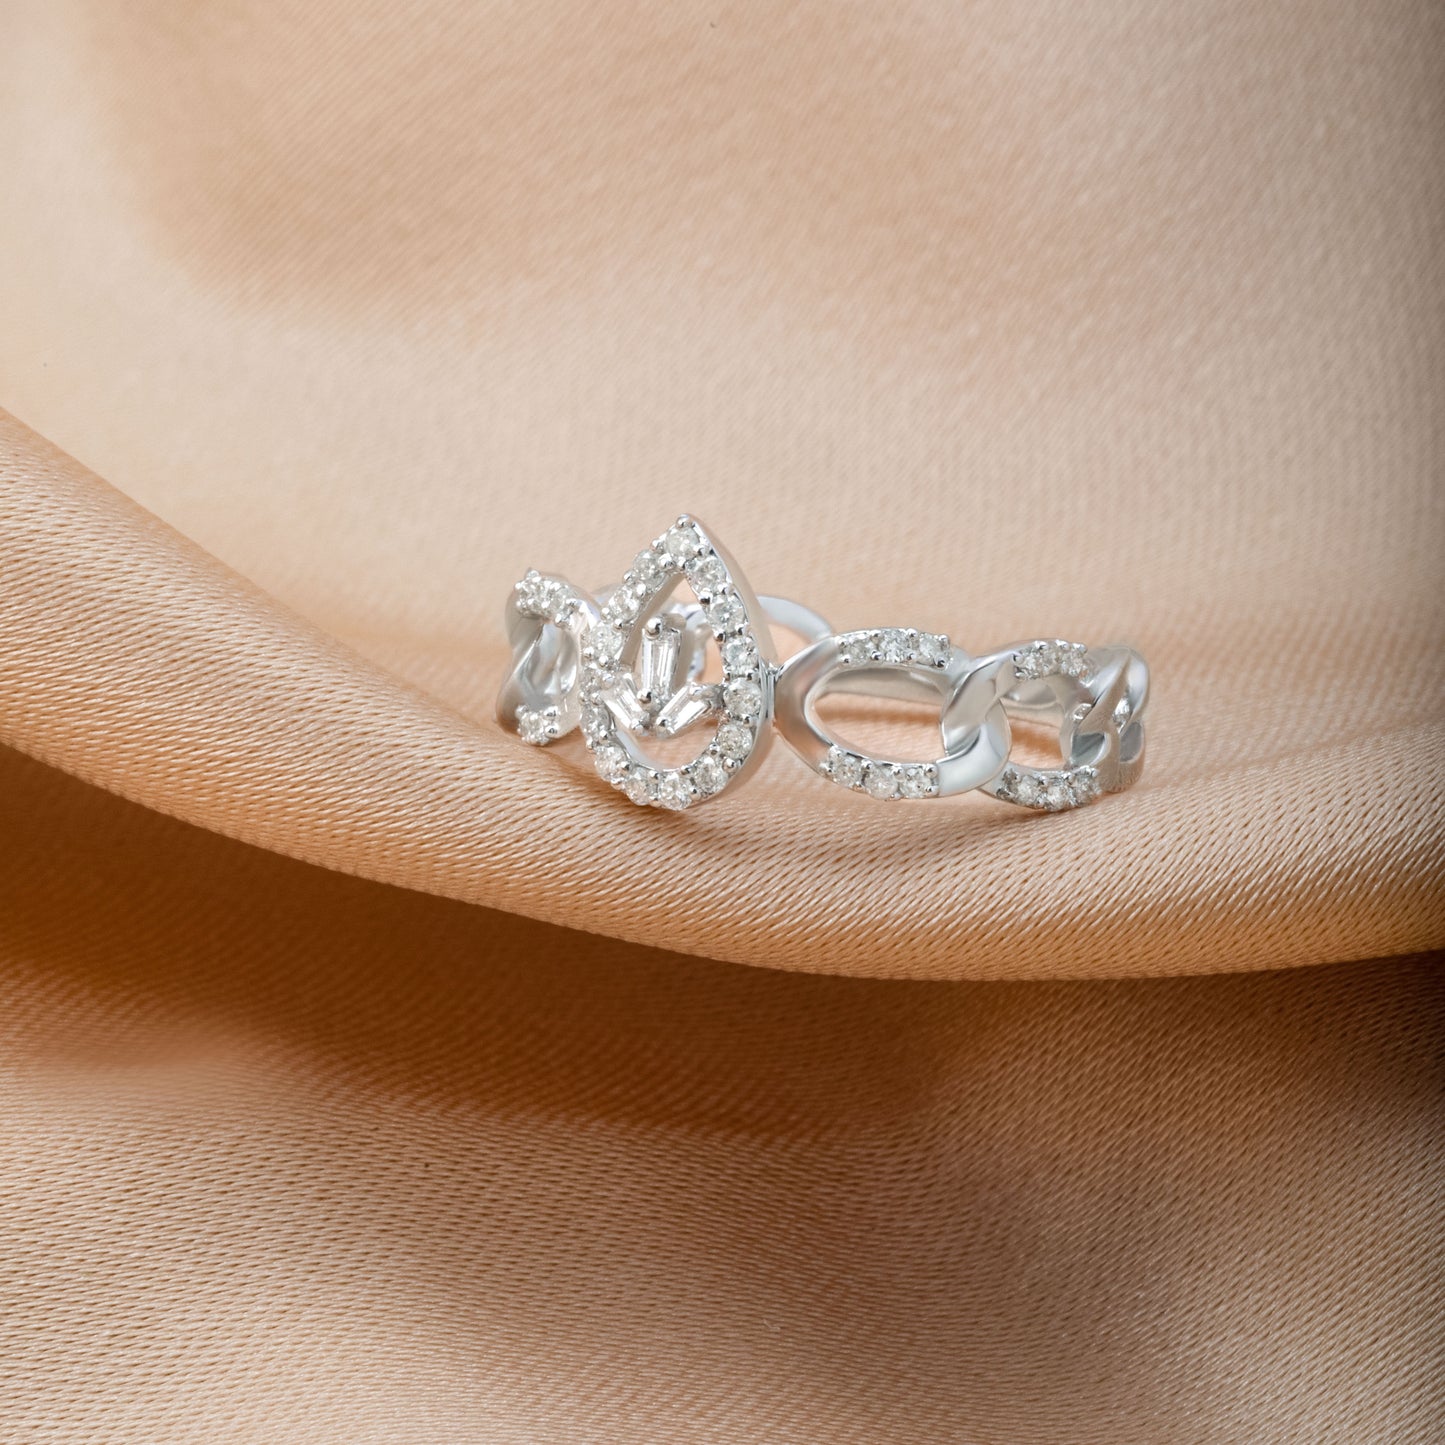 BAGUETTE DIAMOND PEAR SEQUENCE RING